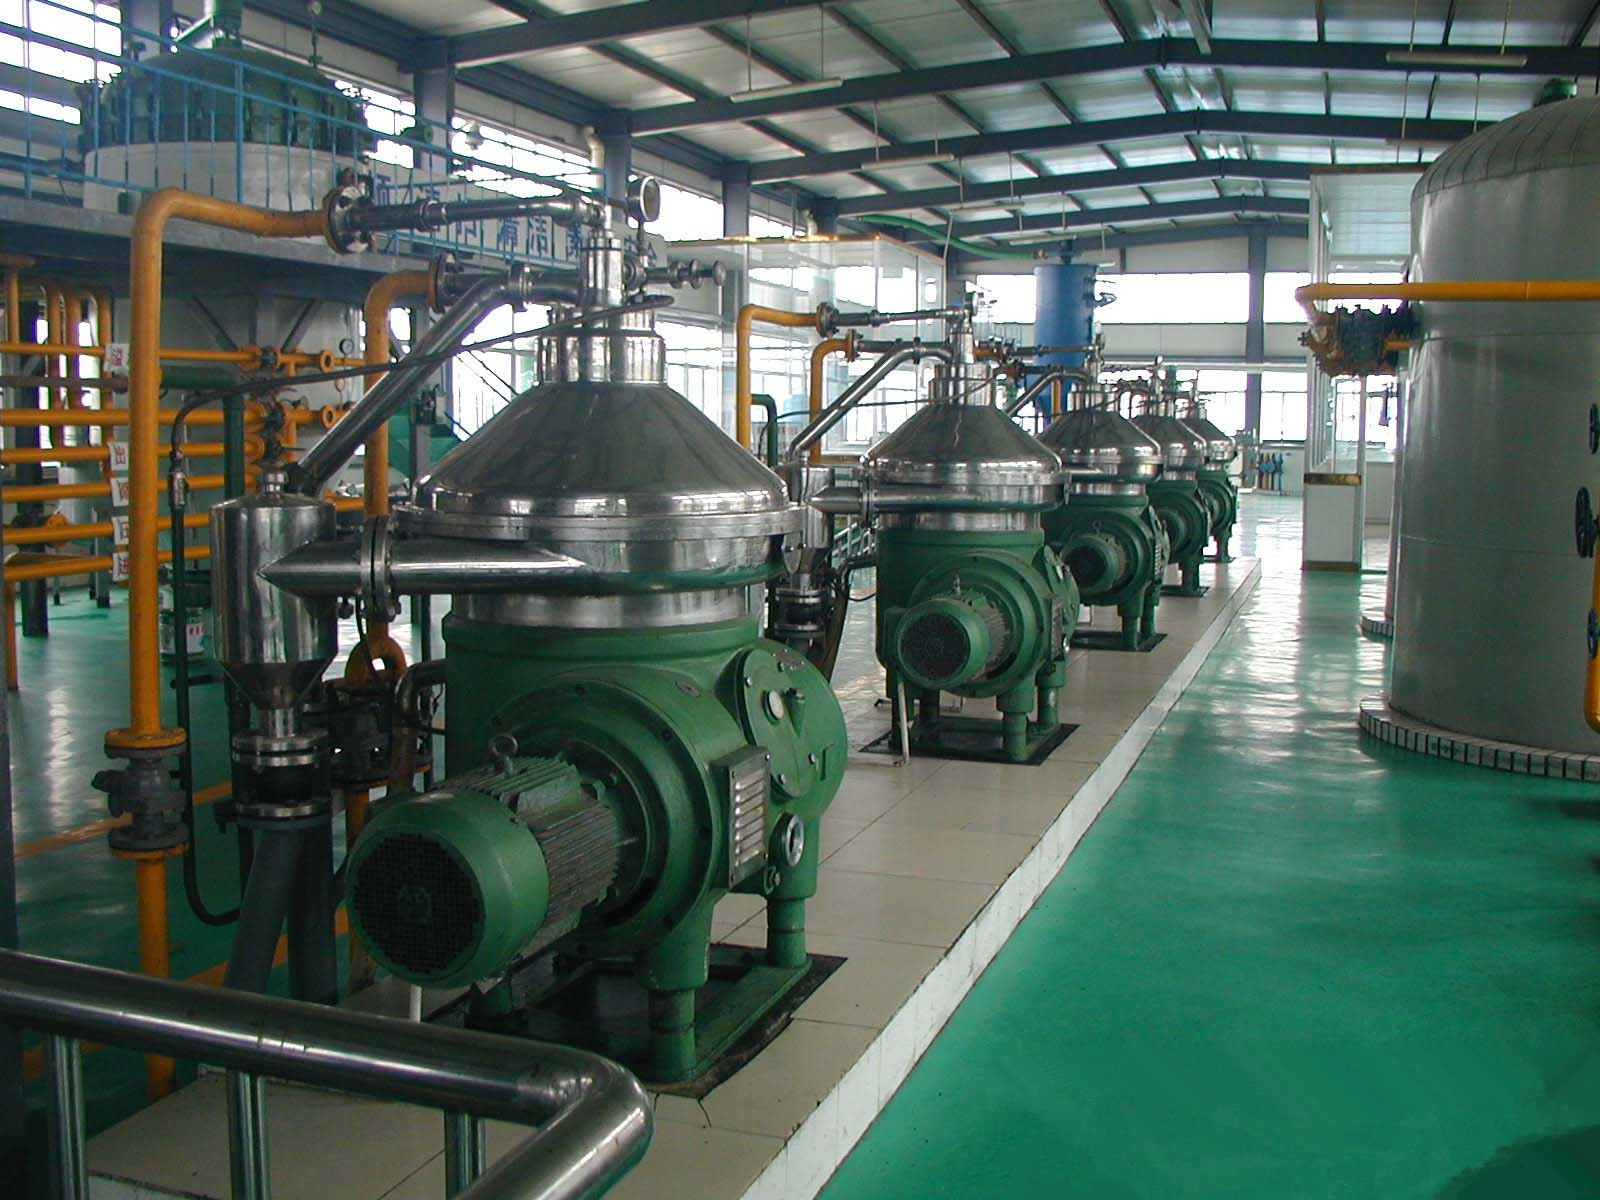 Hunan Province, the whole continuous oil refining production line